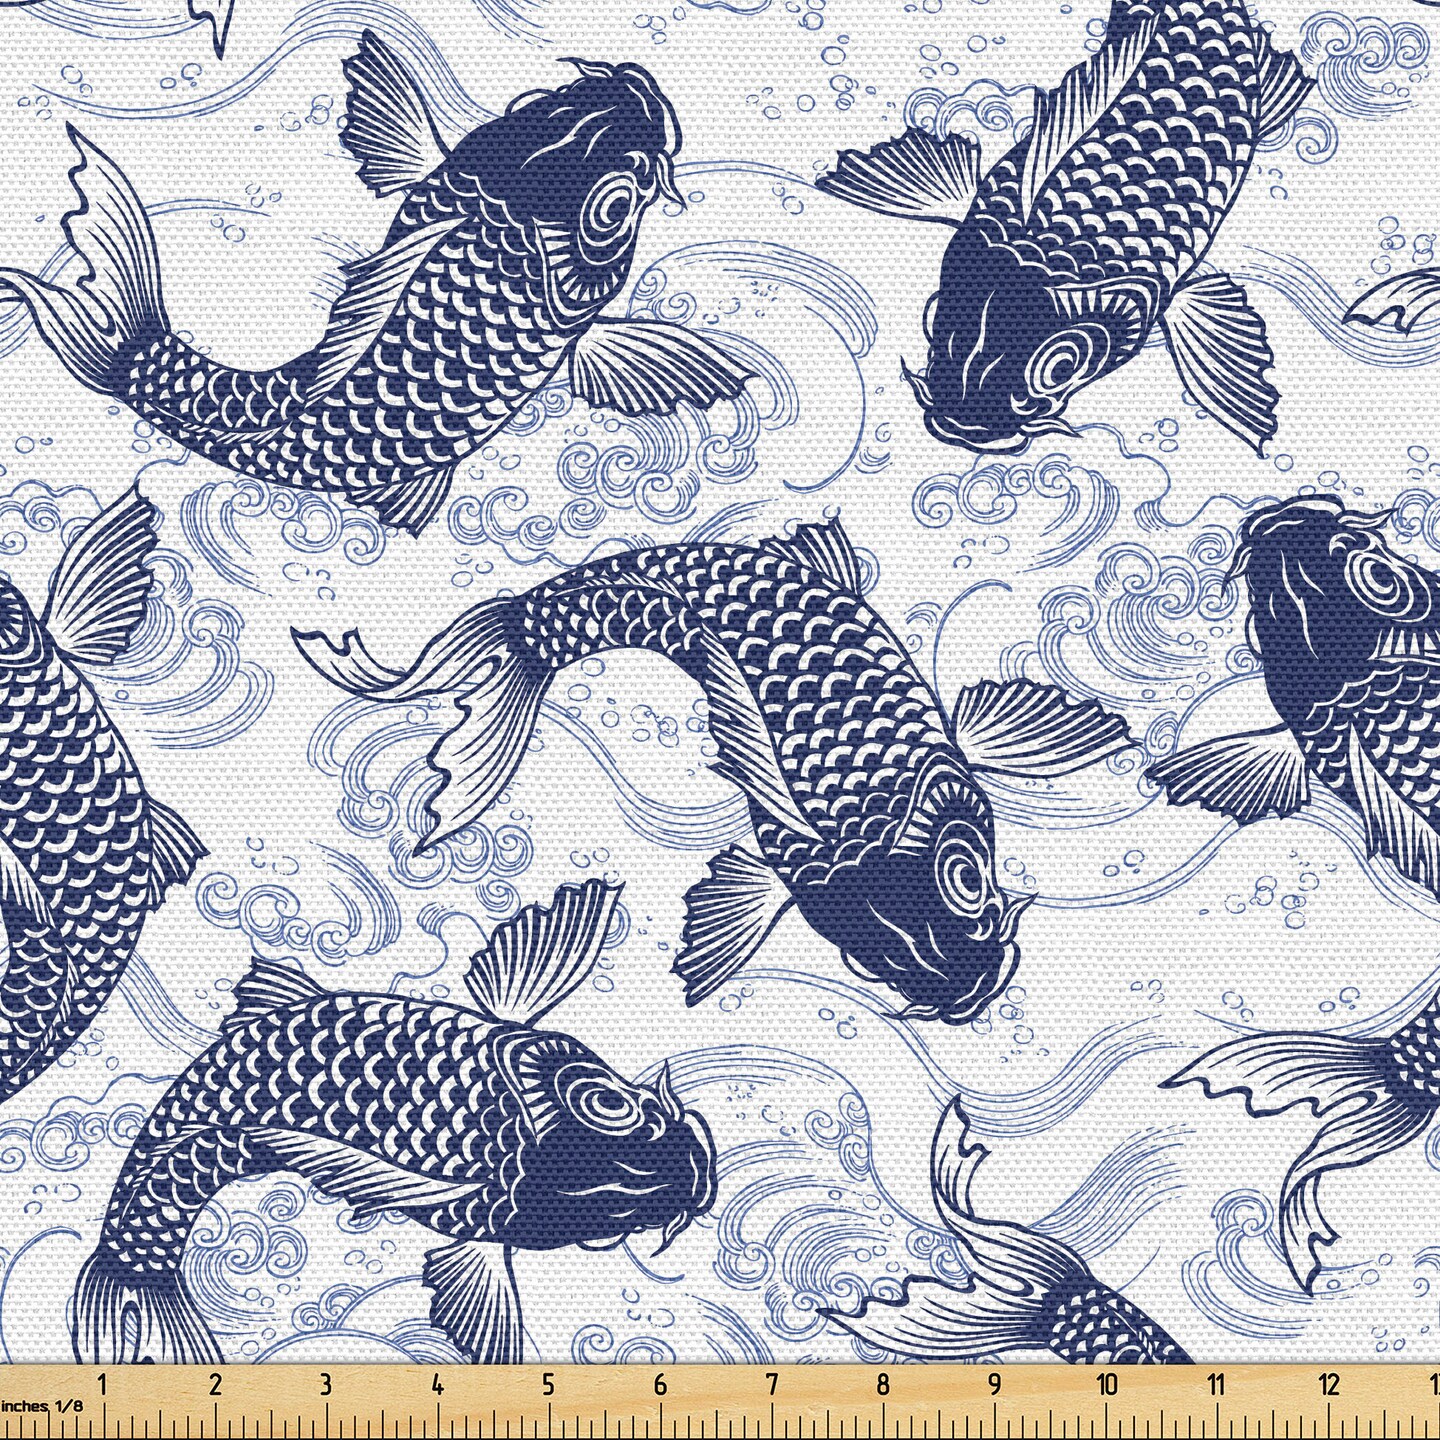 Ambesonne Fish Fabric by the Yard, Japanese Carp Koi Wave Patterned  Background Ancestral Animals Culture, Decorative Fabric for Upholstery and  Home Accents, 1 Yard, Dark Blue White